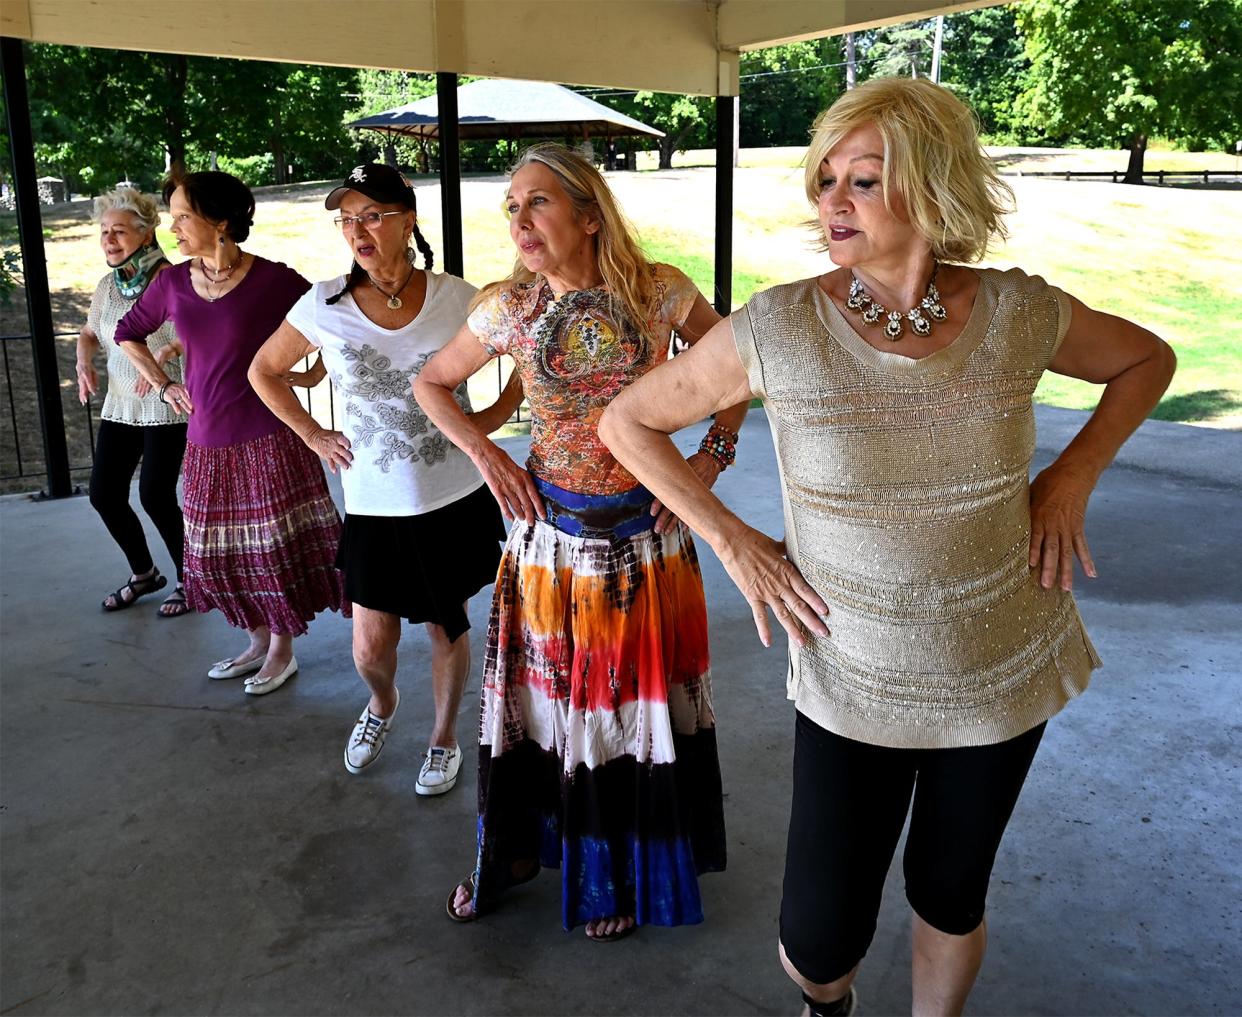 SHREWSBURY - Members of Silver Moon Gypsies practice their "gypsy fusion" style of dancing under a pavilion at Dean Park on Tuesday. Headed by Gypsy Phillips, 83, of Northborough, a dance instructor for 50 years, the "senior" group of ladies has been together for 12 years as they go out and perform for many health care and assisted living facilities or wherever they are requested. From right are Elaine Savoy, 78, of Millbury, Anna Connors, 68. of Shrewsbury, Gypsy Phillips, 83, of Northborough, Alida Krumin, 84, of Southborough and Norma Giumentaro, 89, of Shrewsbury.